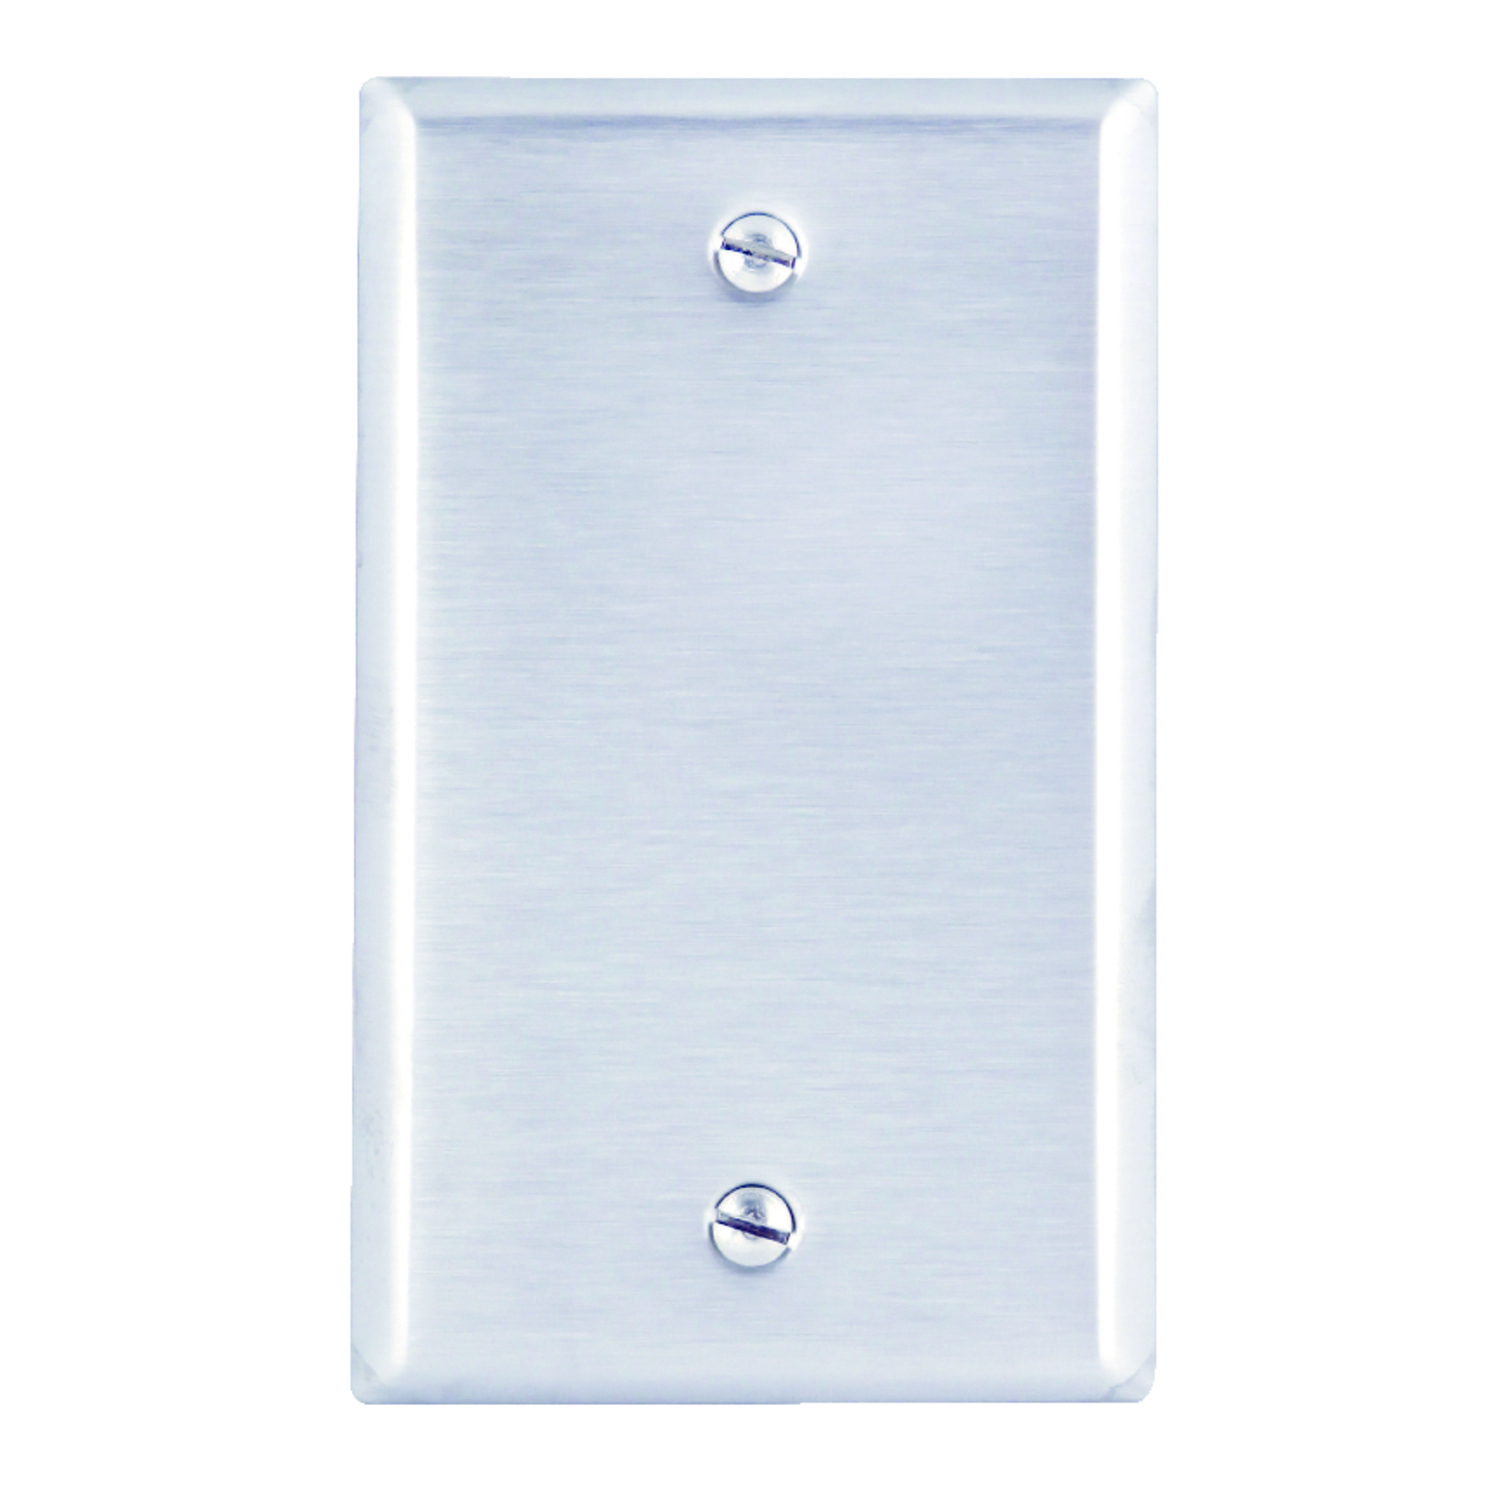 Photos - Household Switch Leviton Silver 1 gang Stainless Steel Blank Wall Plate 1 pk 84014-000 